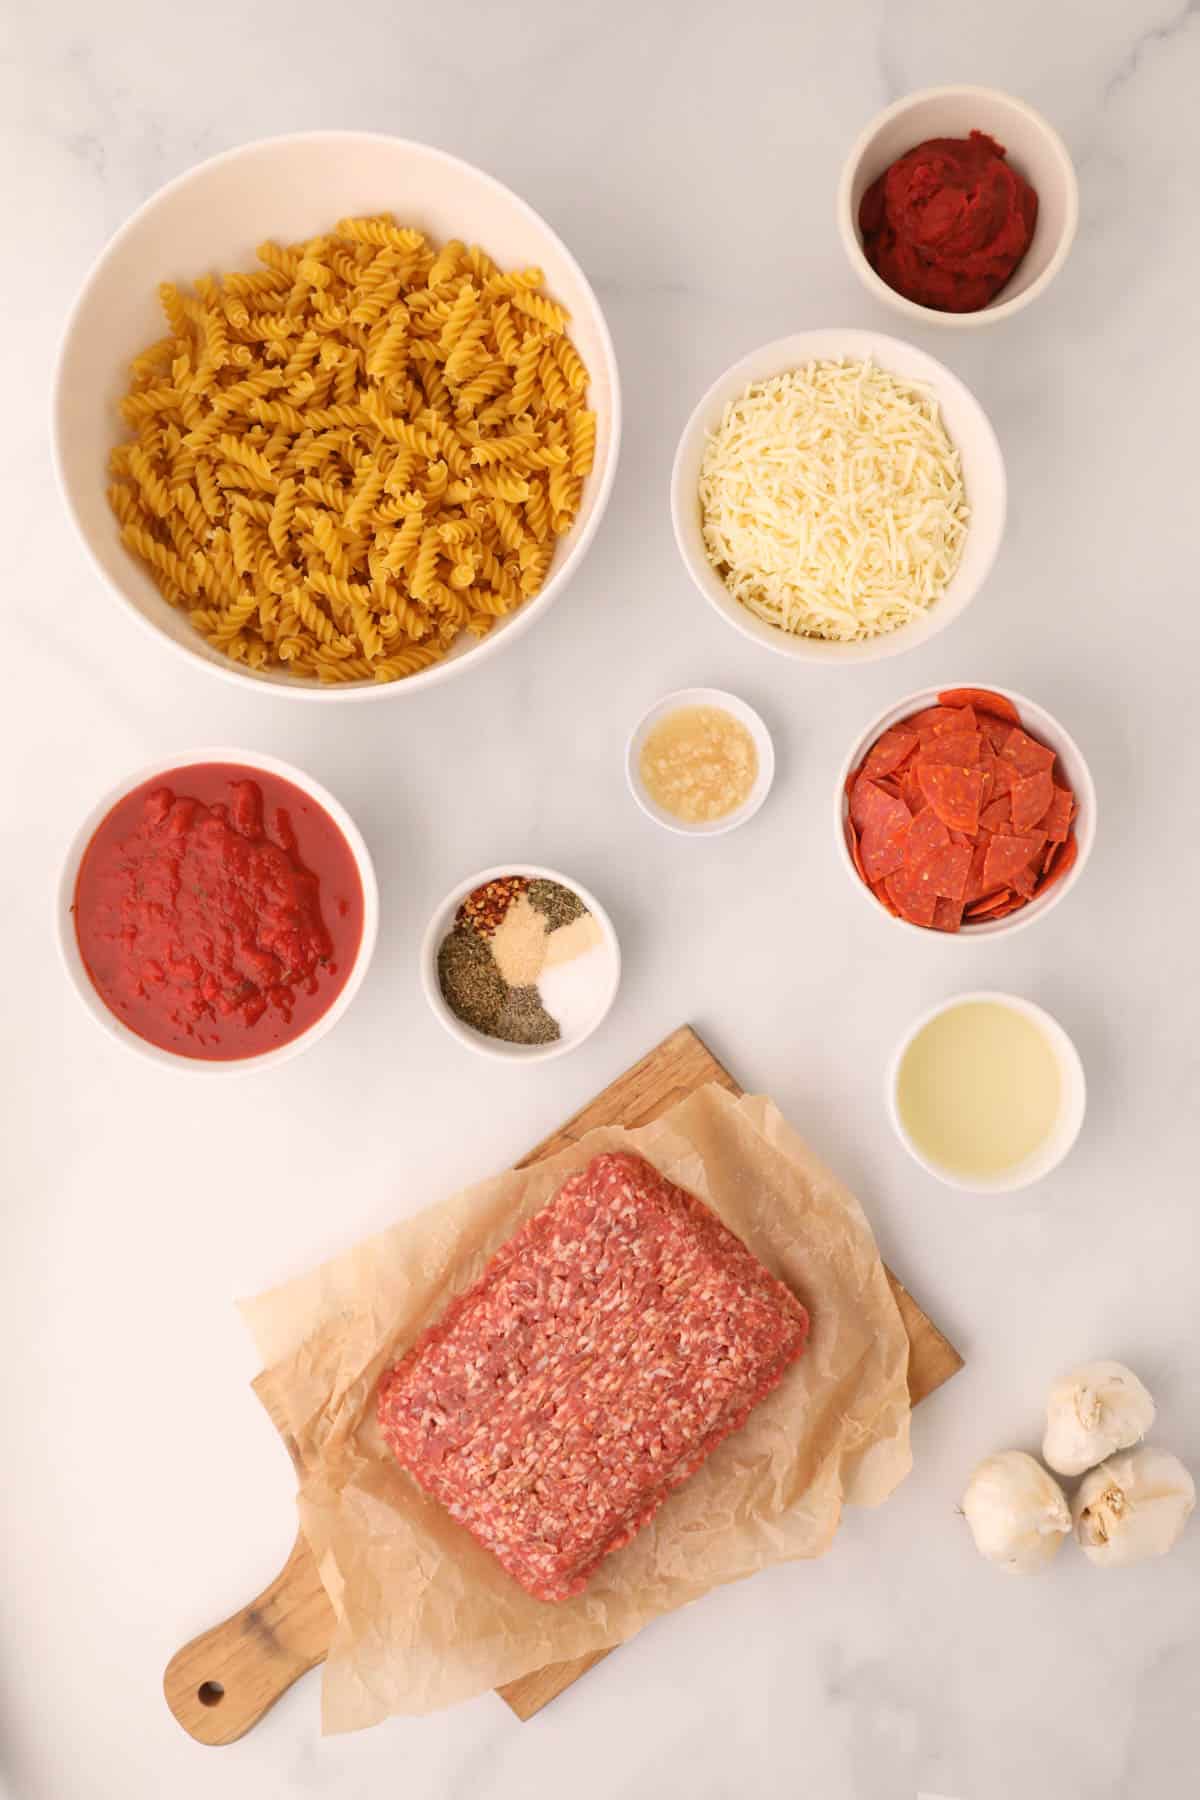 Ingredients for making pizza pasta casserole.